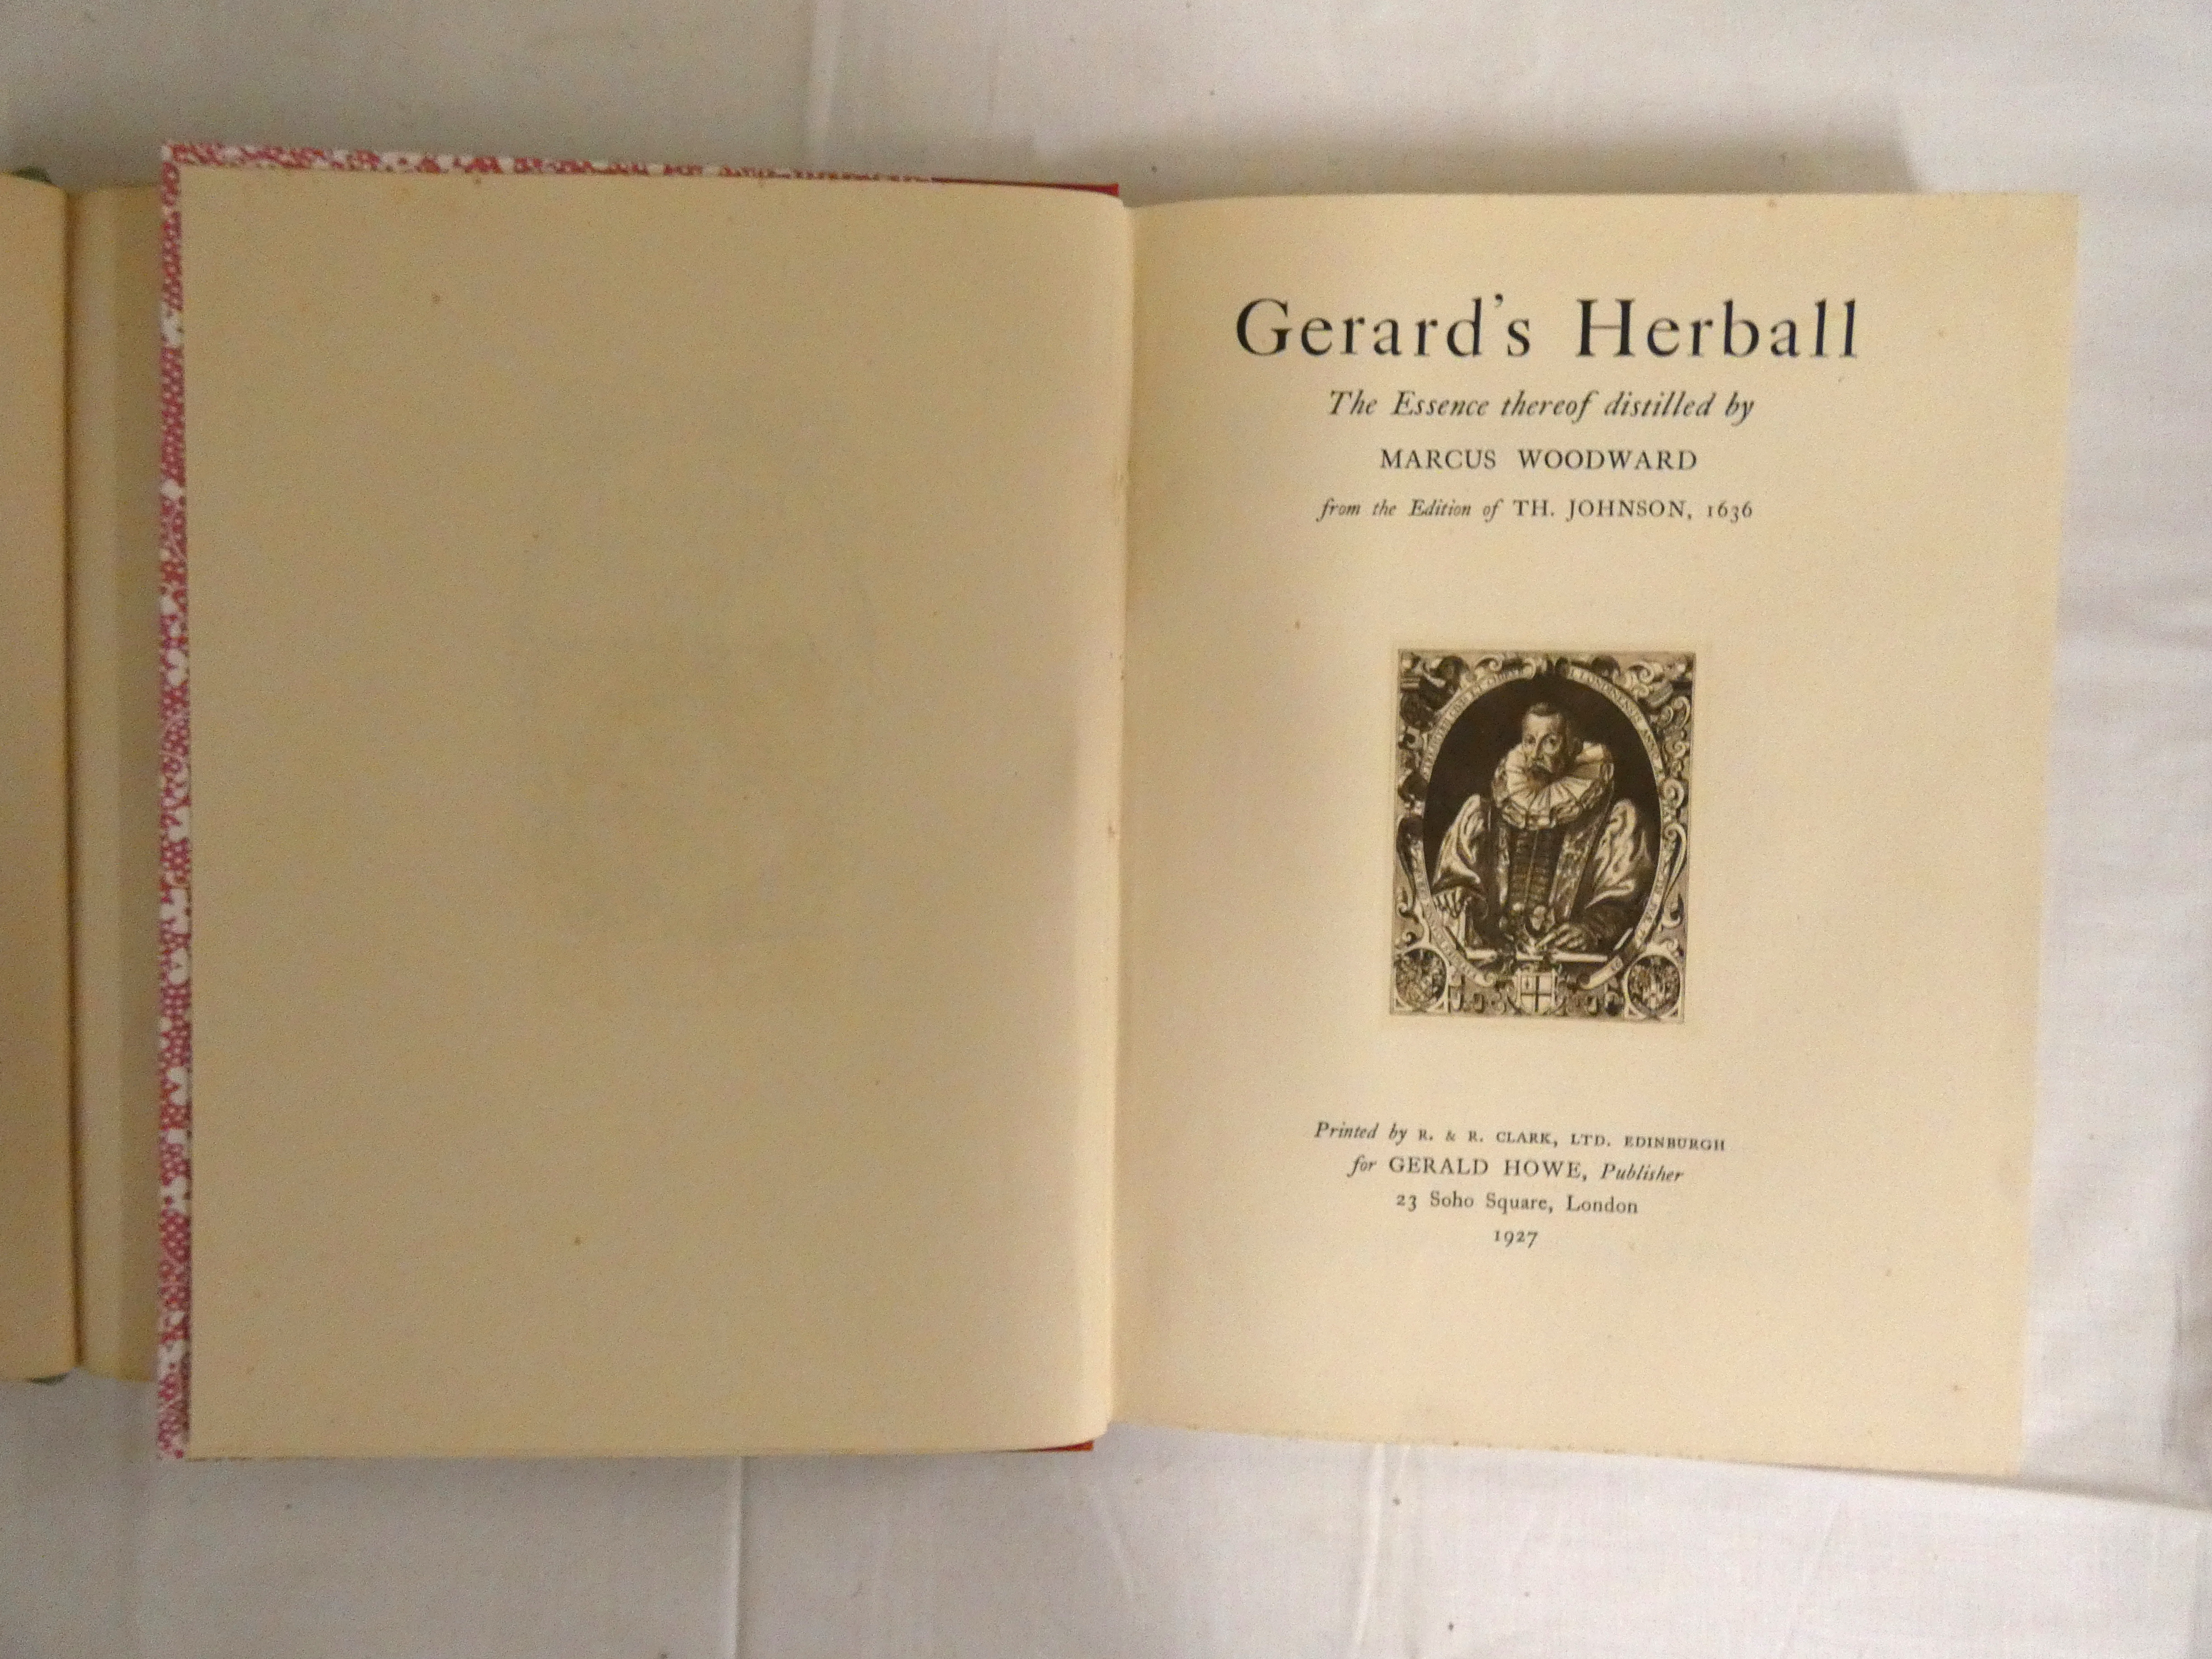 WOODWARD MARCUS.  Gerard's Herball. Title engraving & text illus. Quarto. Rebound red qtr. cloth. " - Image 3 of 3